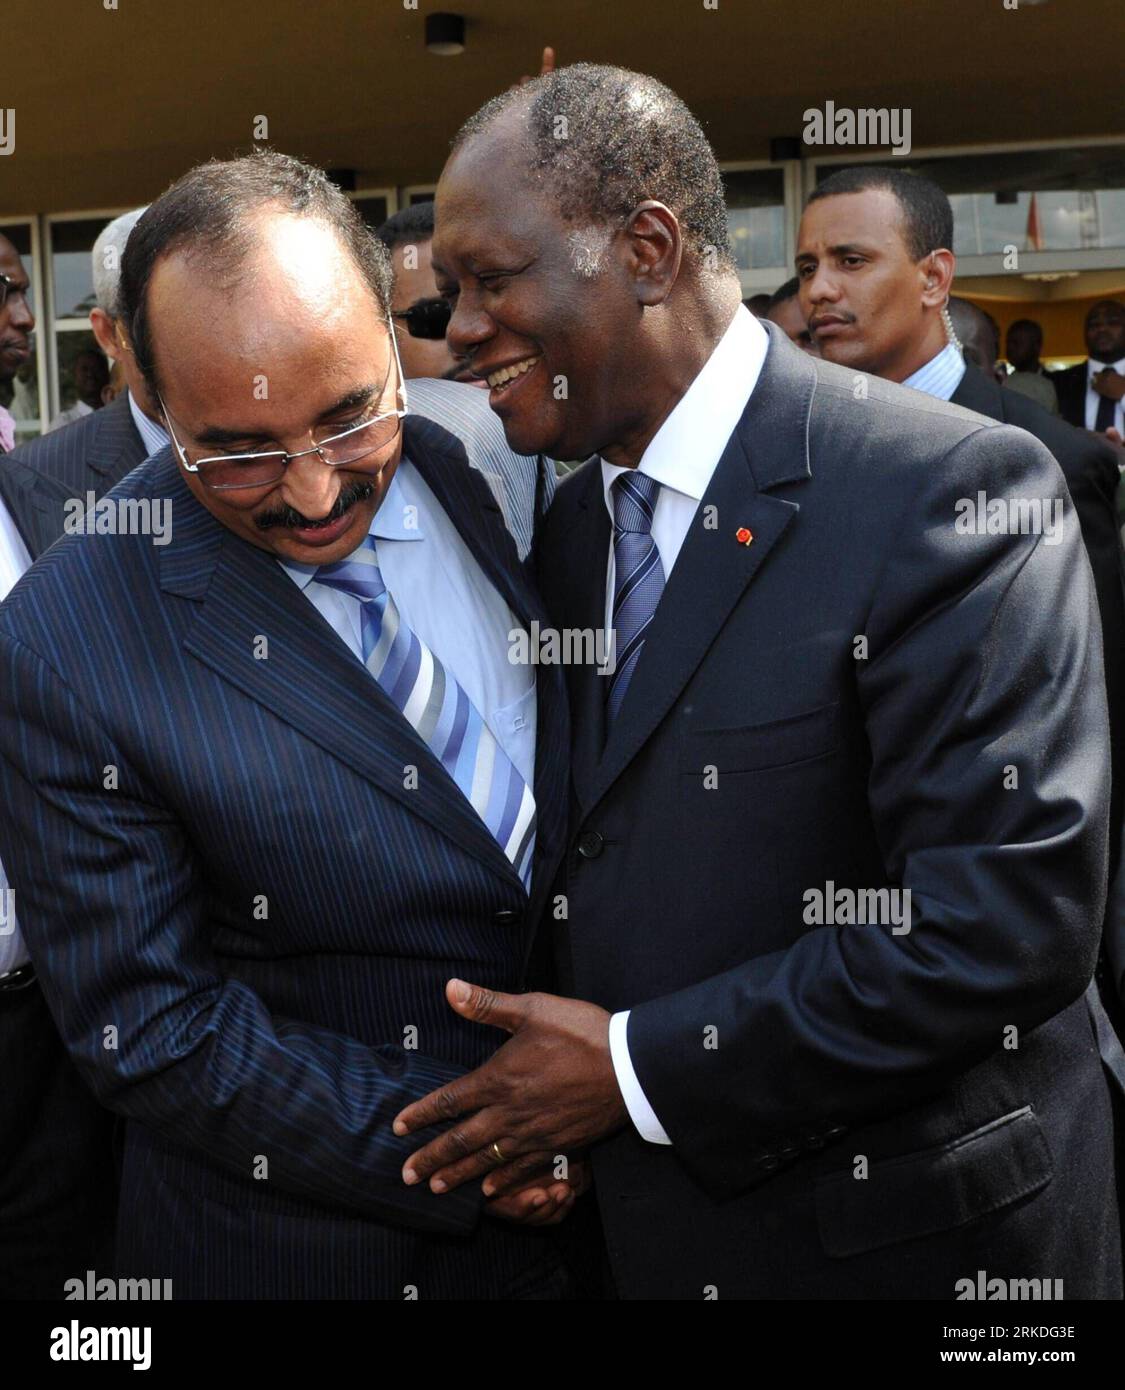 Bildnummer: 54943545  Datum: 22.02.2011  Copyright: imago/Xinhua (110222) -- ABIDJAN, Feb. 22, 2011 (Xinhua) -- Alassane Ouattara (R Front) sees Mauritanian President Mohamed Ould Abdel Aziz off in front of the Golf Hotel in Abidjan, Cote d Ivoire s economic capital, Feb. 22, 2011. The African Union (AU) panel of presidents met AlassanexOuattara at the Golf Hotel where he is still holed up. Both xGbagbox and xOuattarax have claimed the presidency since the election. The international community including the United Nations and the African Union recognizes xOuattarax as the president-elect. (Xin Stock Photo